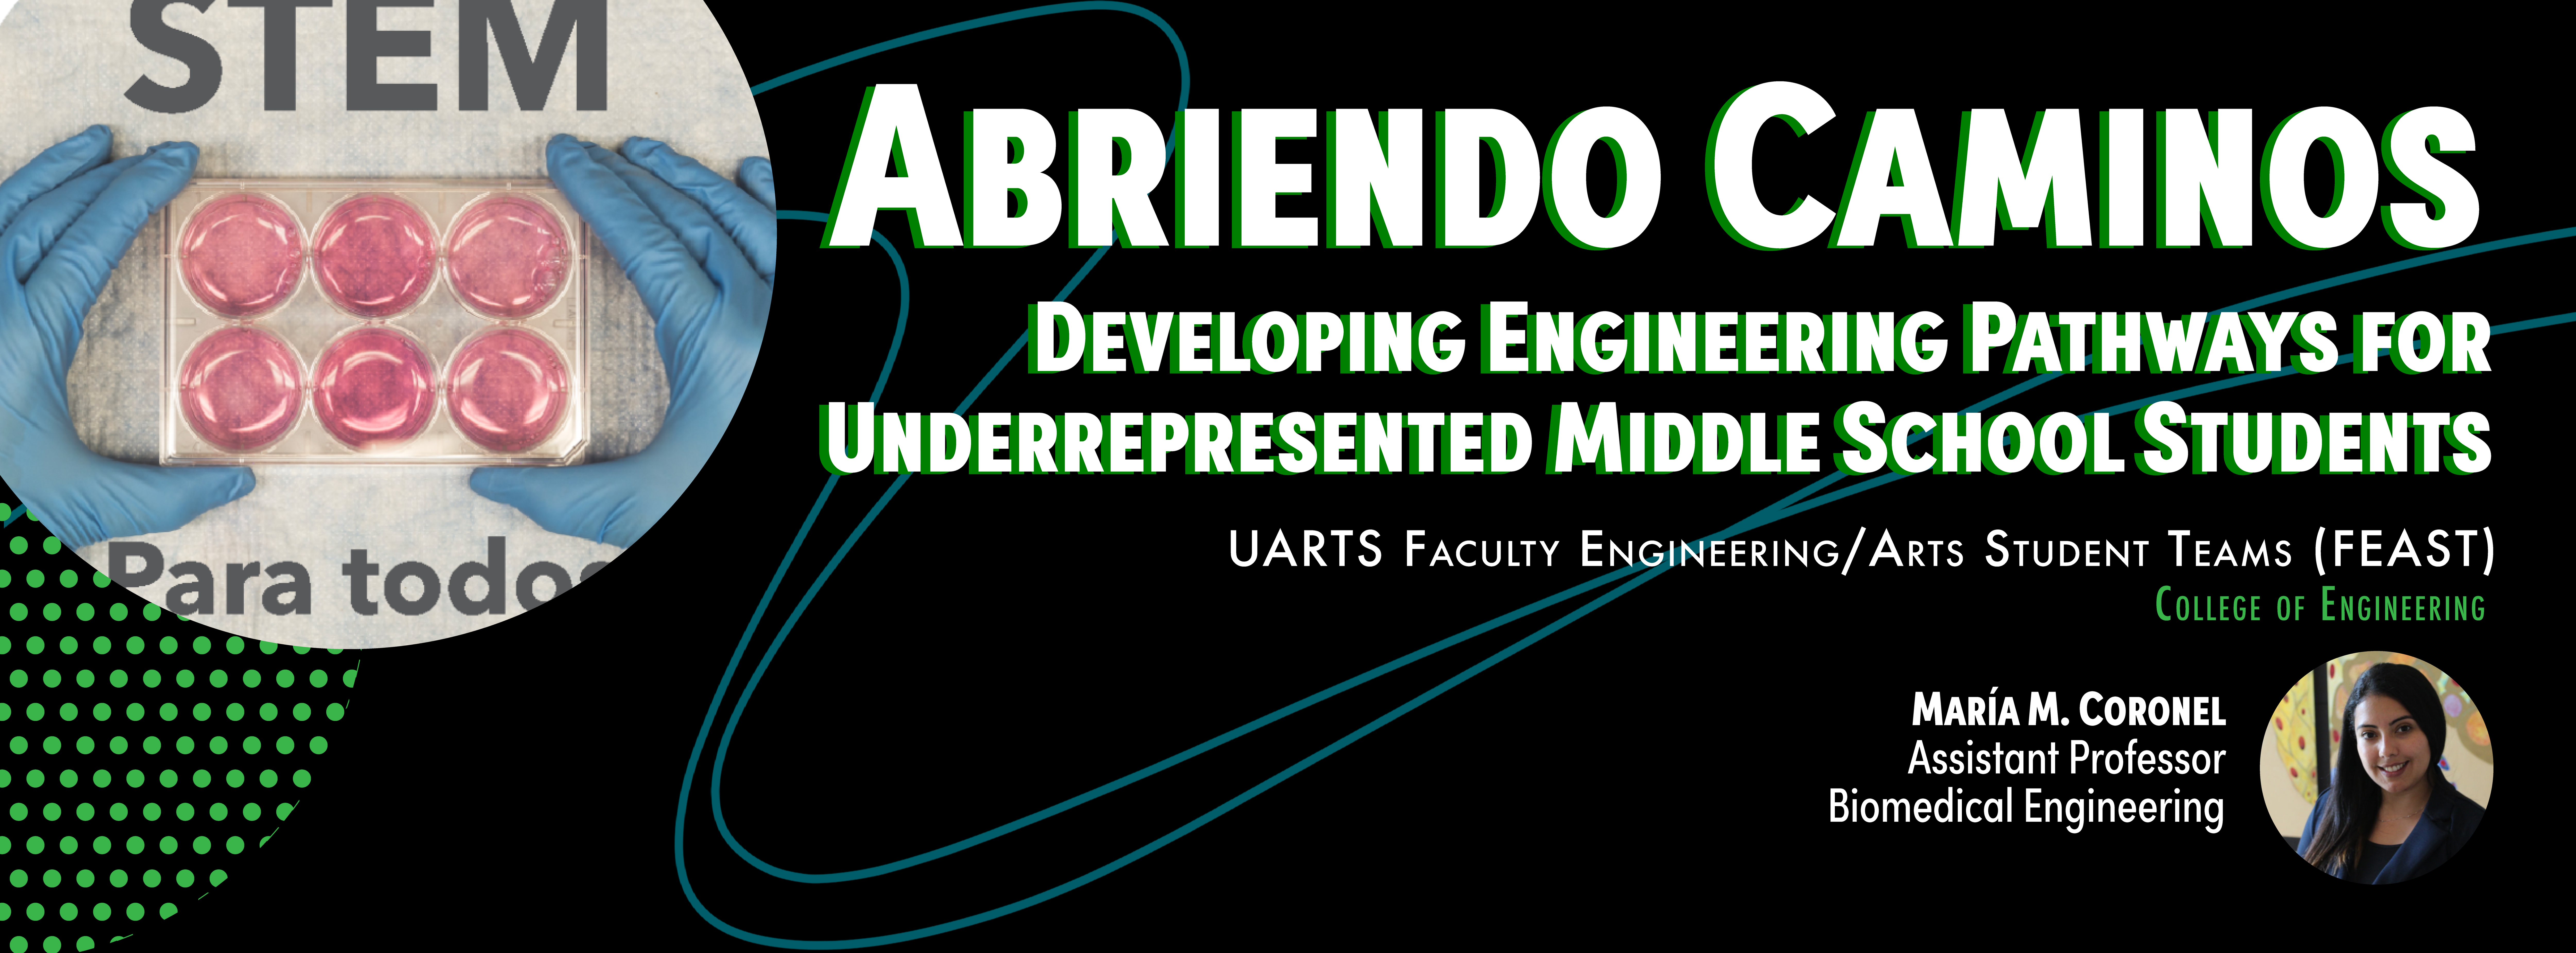 Abriendo Caminos: Developing engineering pathways for underrepresented middle school students card